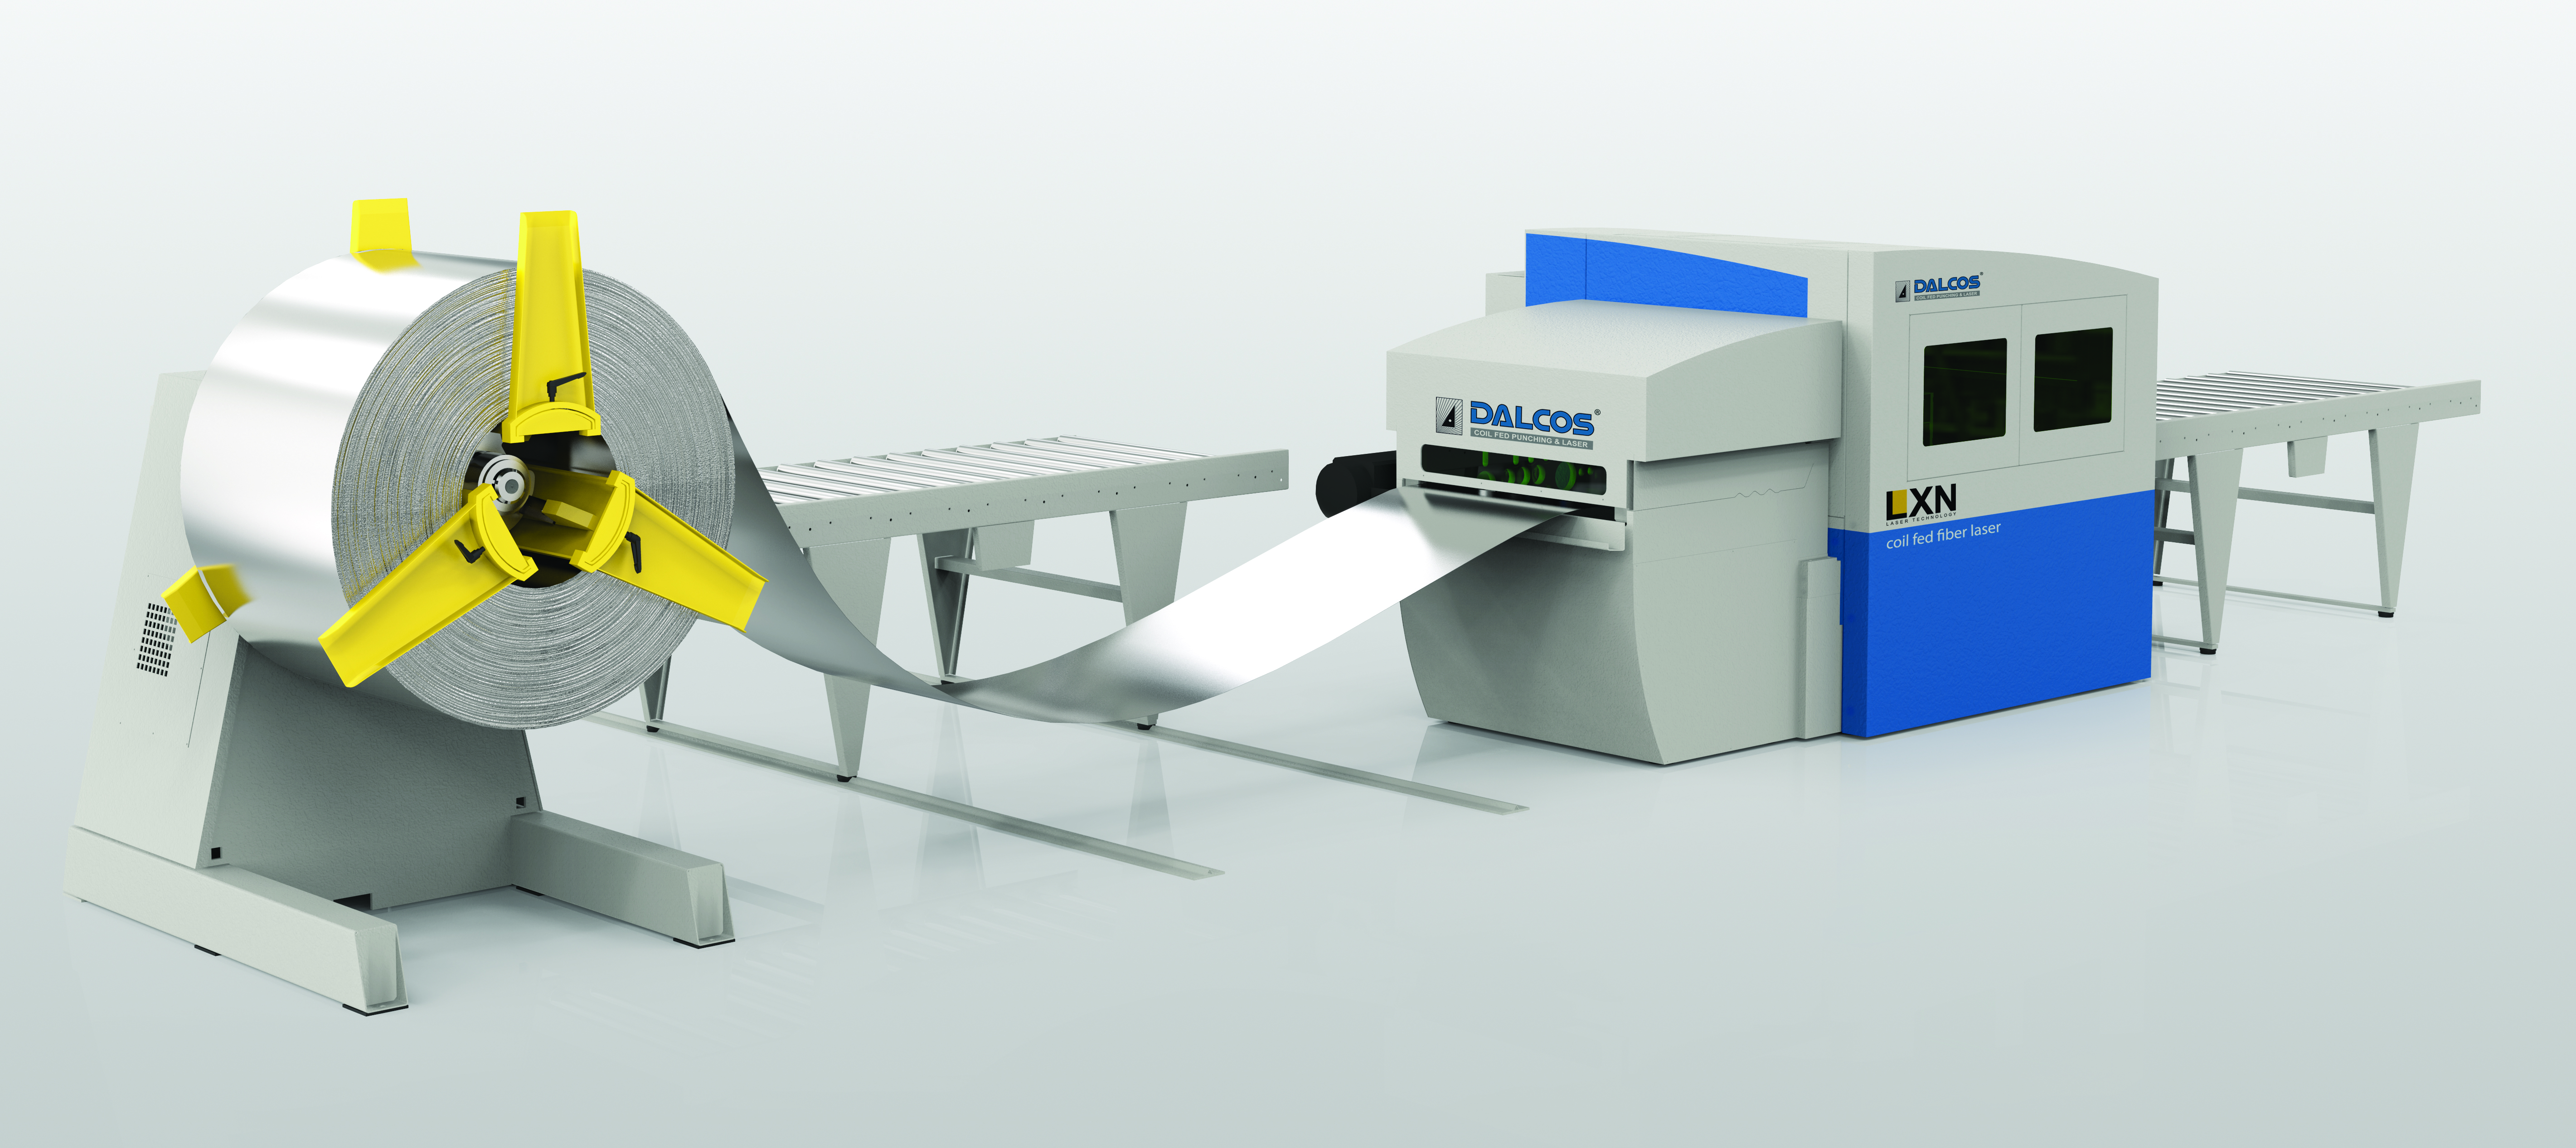 EuroBlech, Dalcos: Lxn vision, automatic laser cutting system - Metal